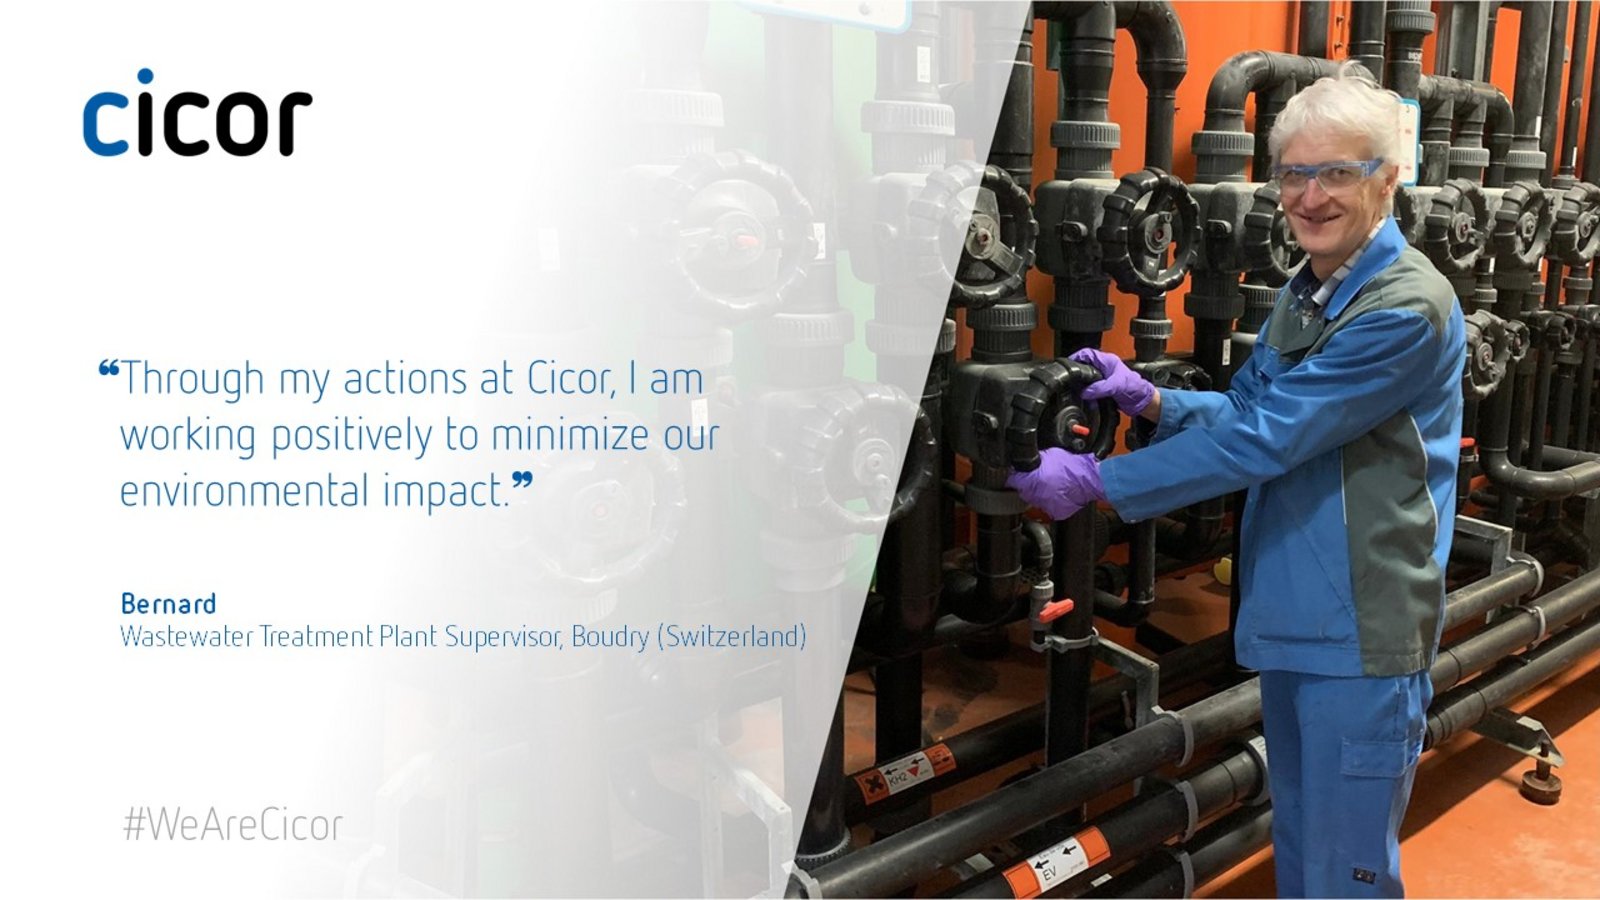 Testimonial of Bernard who works at the Cicor site in Boudry